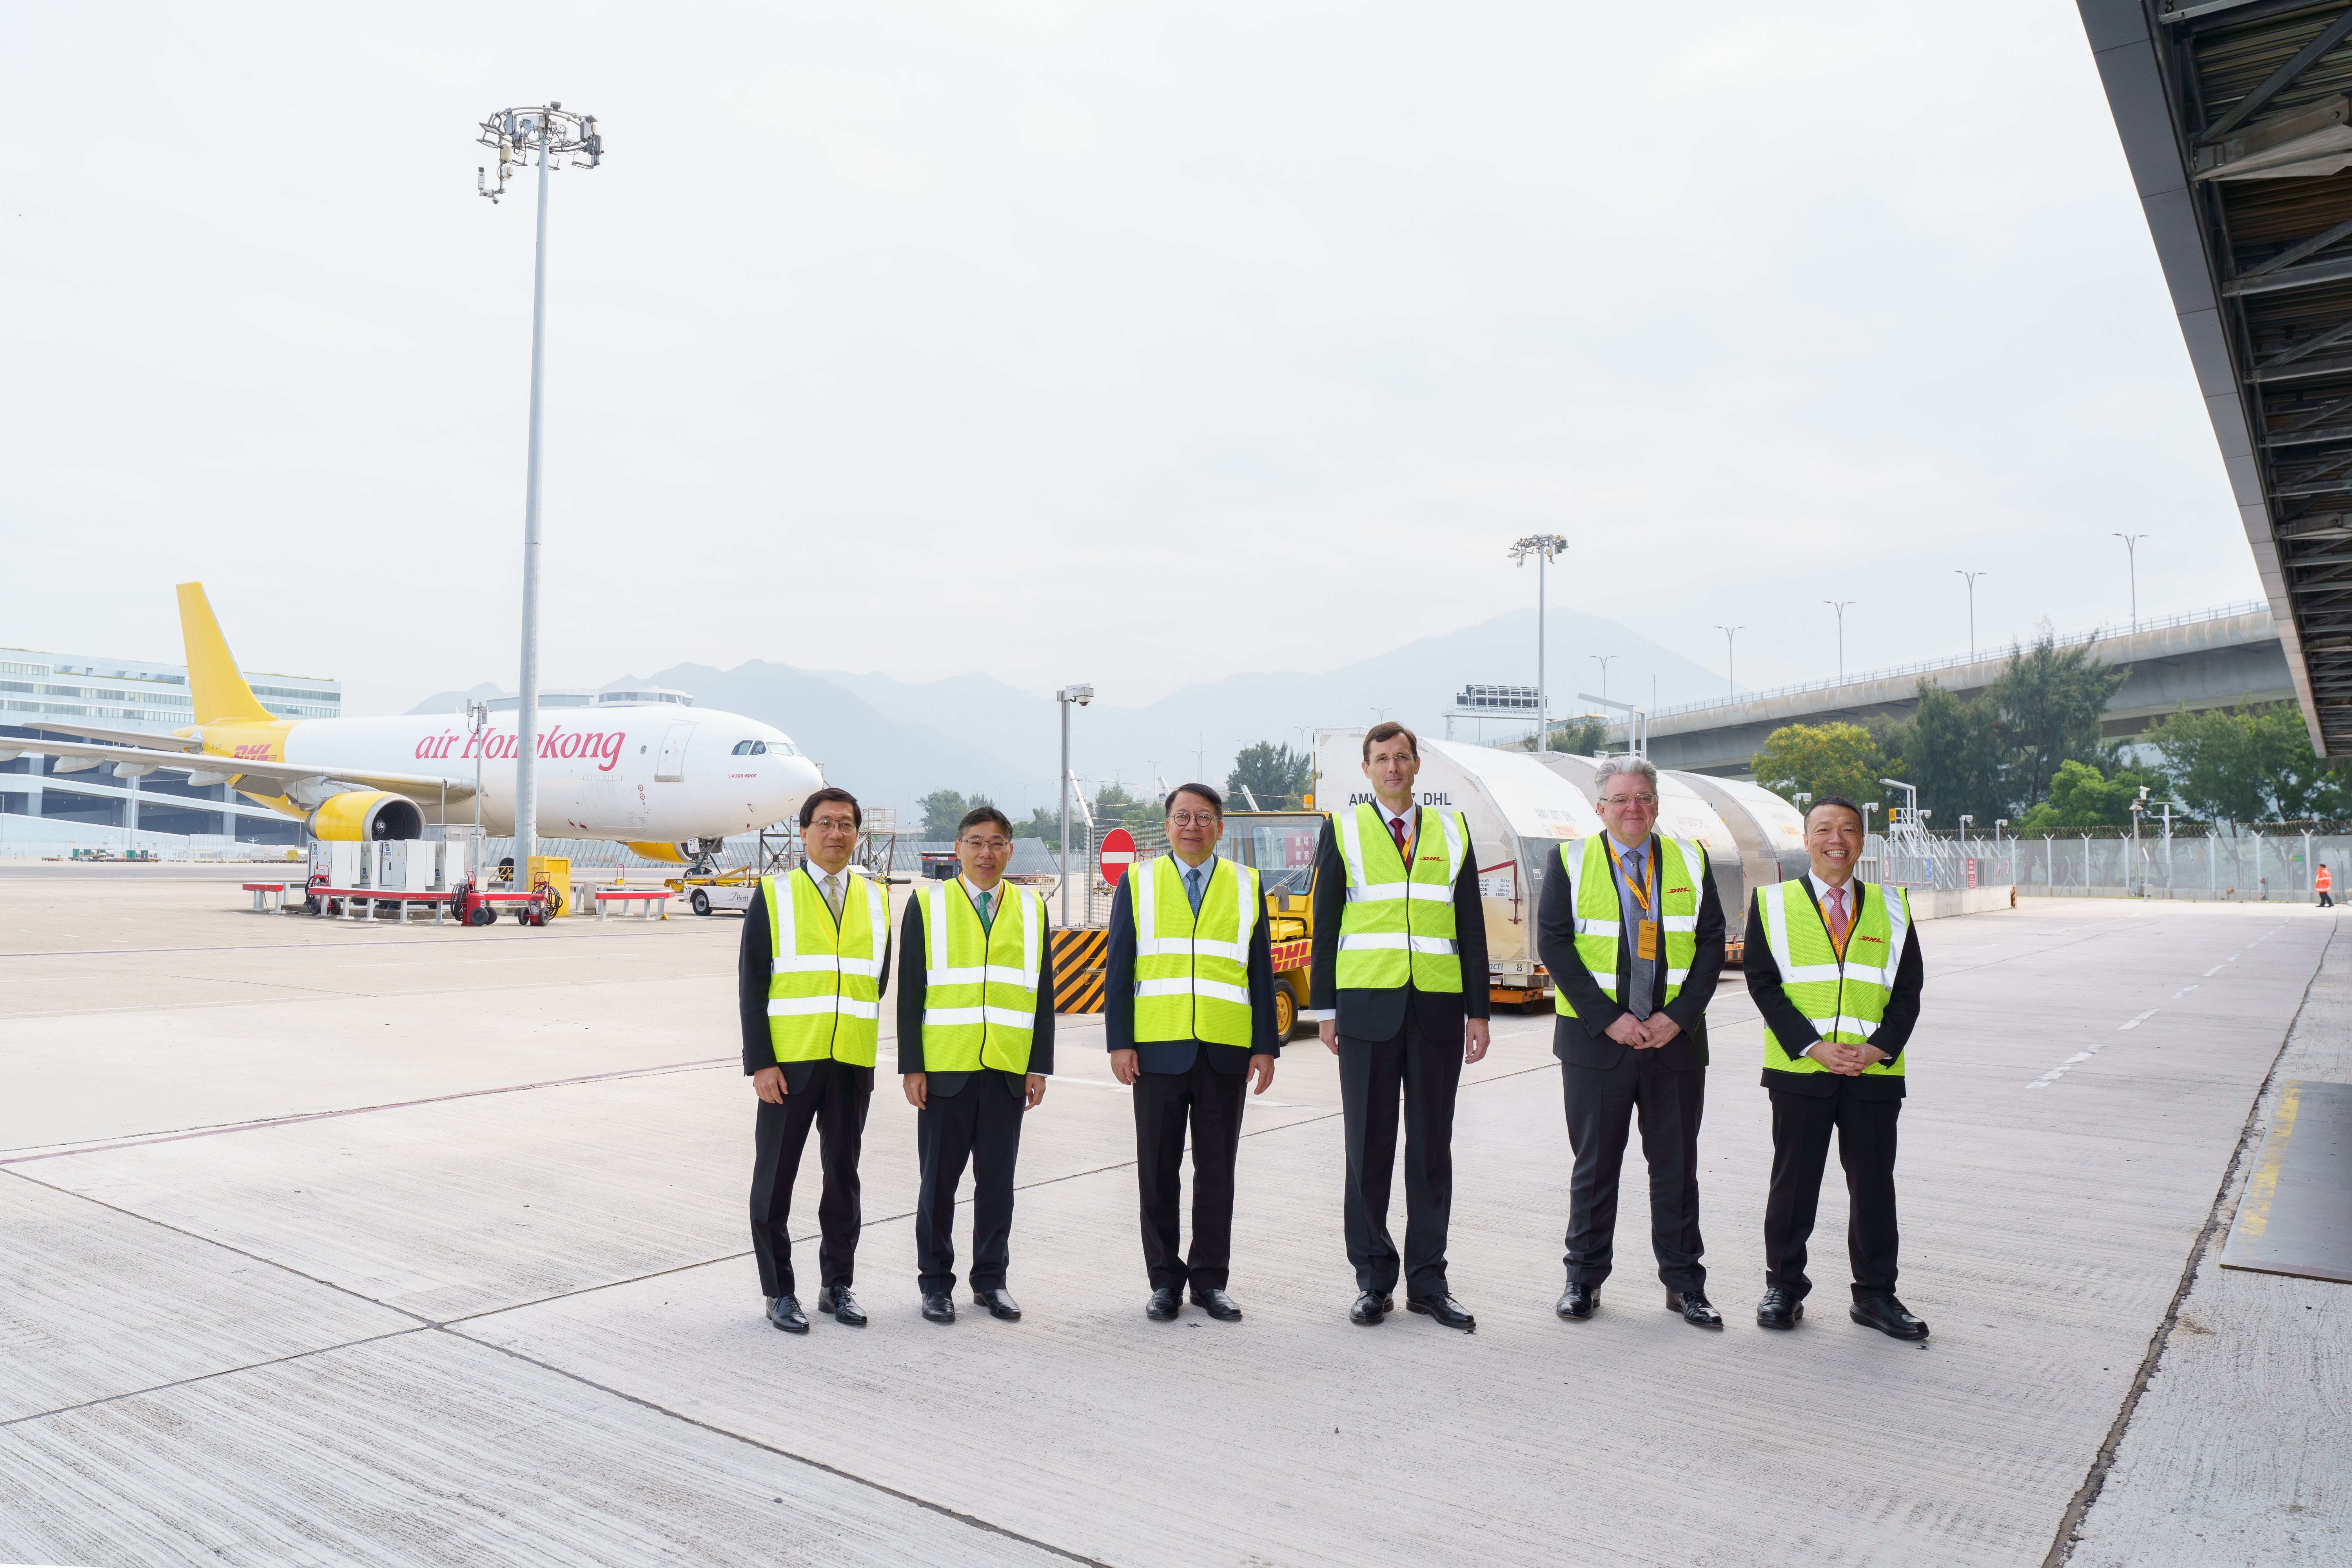 Officiating guests include: KK Chan, Chief Secretary for Administration of the Government of the Hong Kong Special Administrative (third from left);Lam Sai-hung, Secretary for Transport and Logistics of the Government of the Hong Kong Special Administrative (second from left);Fred Lam, CEO of Airport Authority Hong Kong (first from left);Tobias Meyer, CEO of DHL Group (third from right);John Pearson, CEO of DHL Express (second from right); andKen Lee, CEO of DHL Express Asia Pacific (first from right),